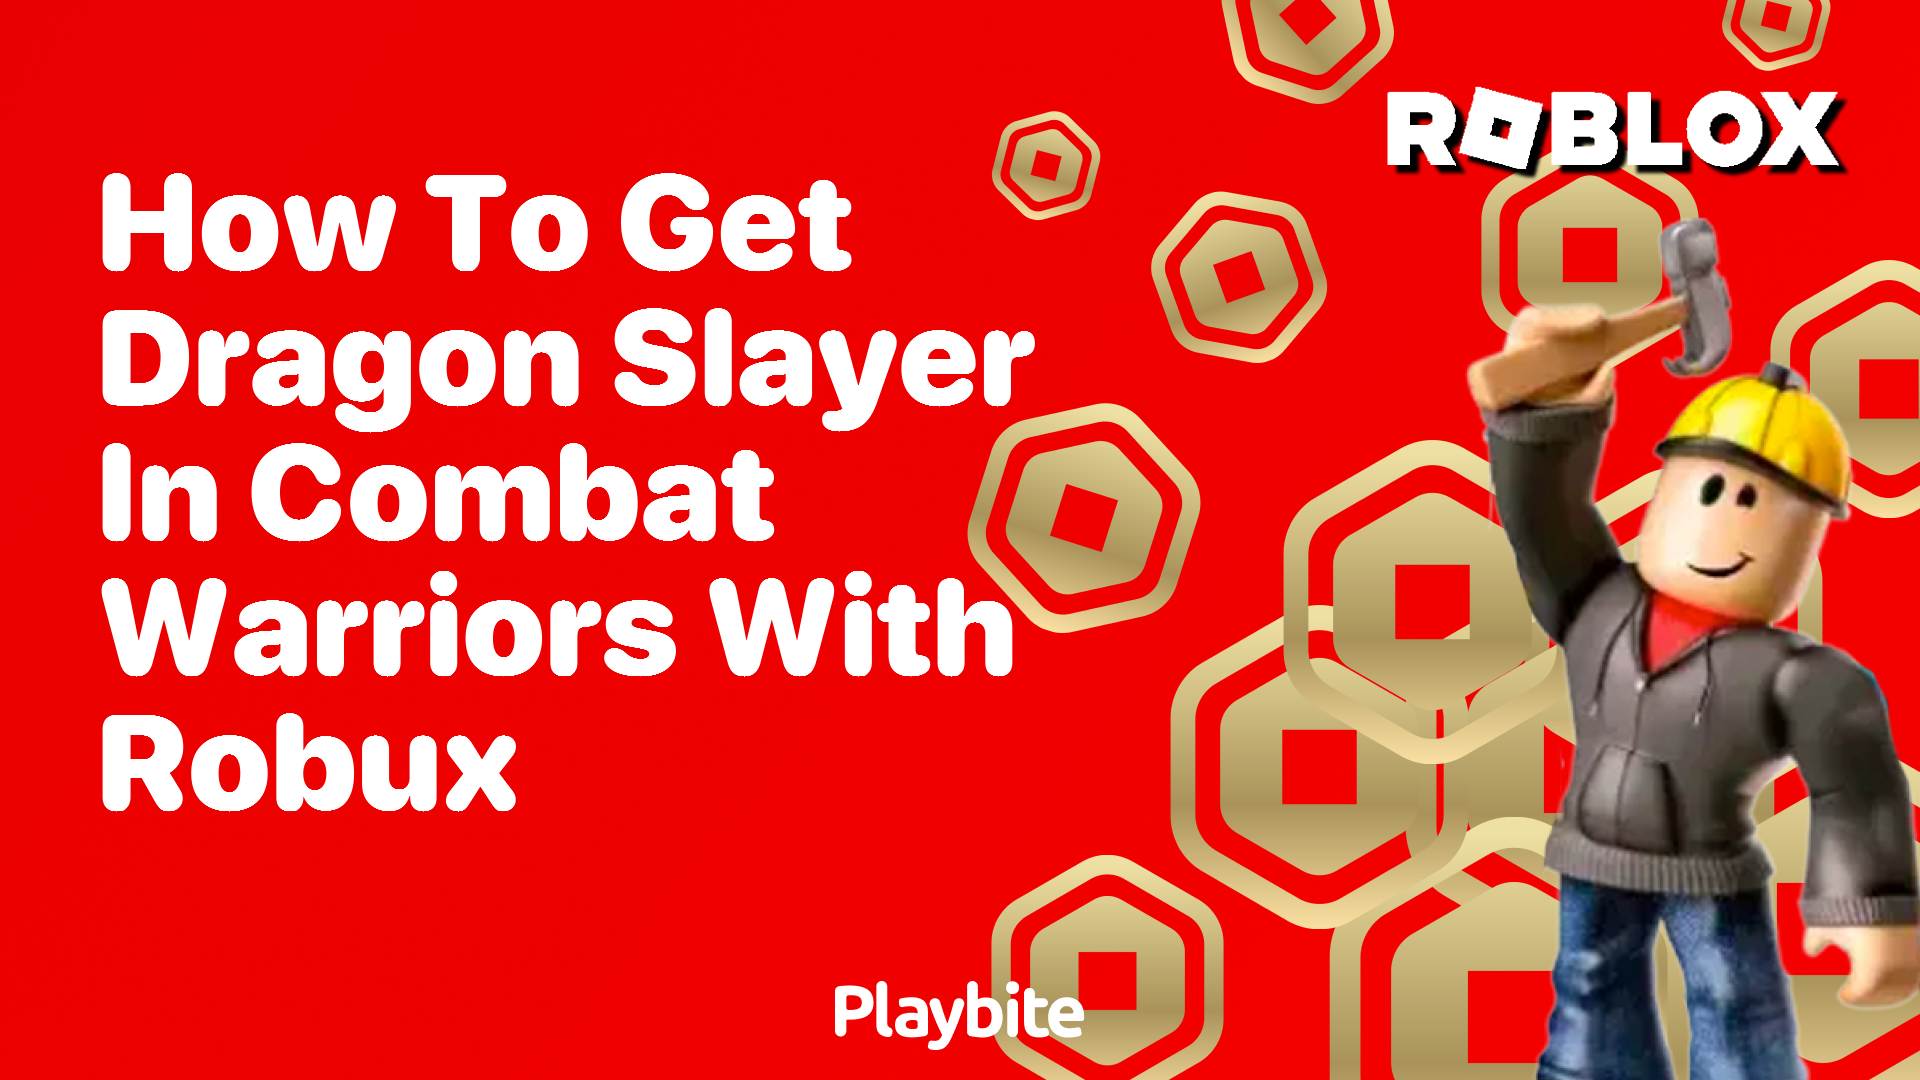 How to Get Dragon Slayer in Combat Warriors with Robux